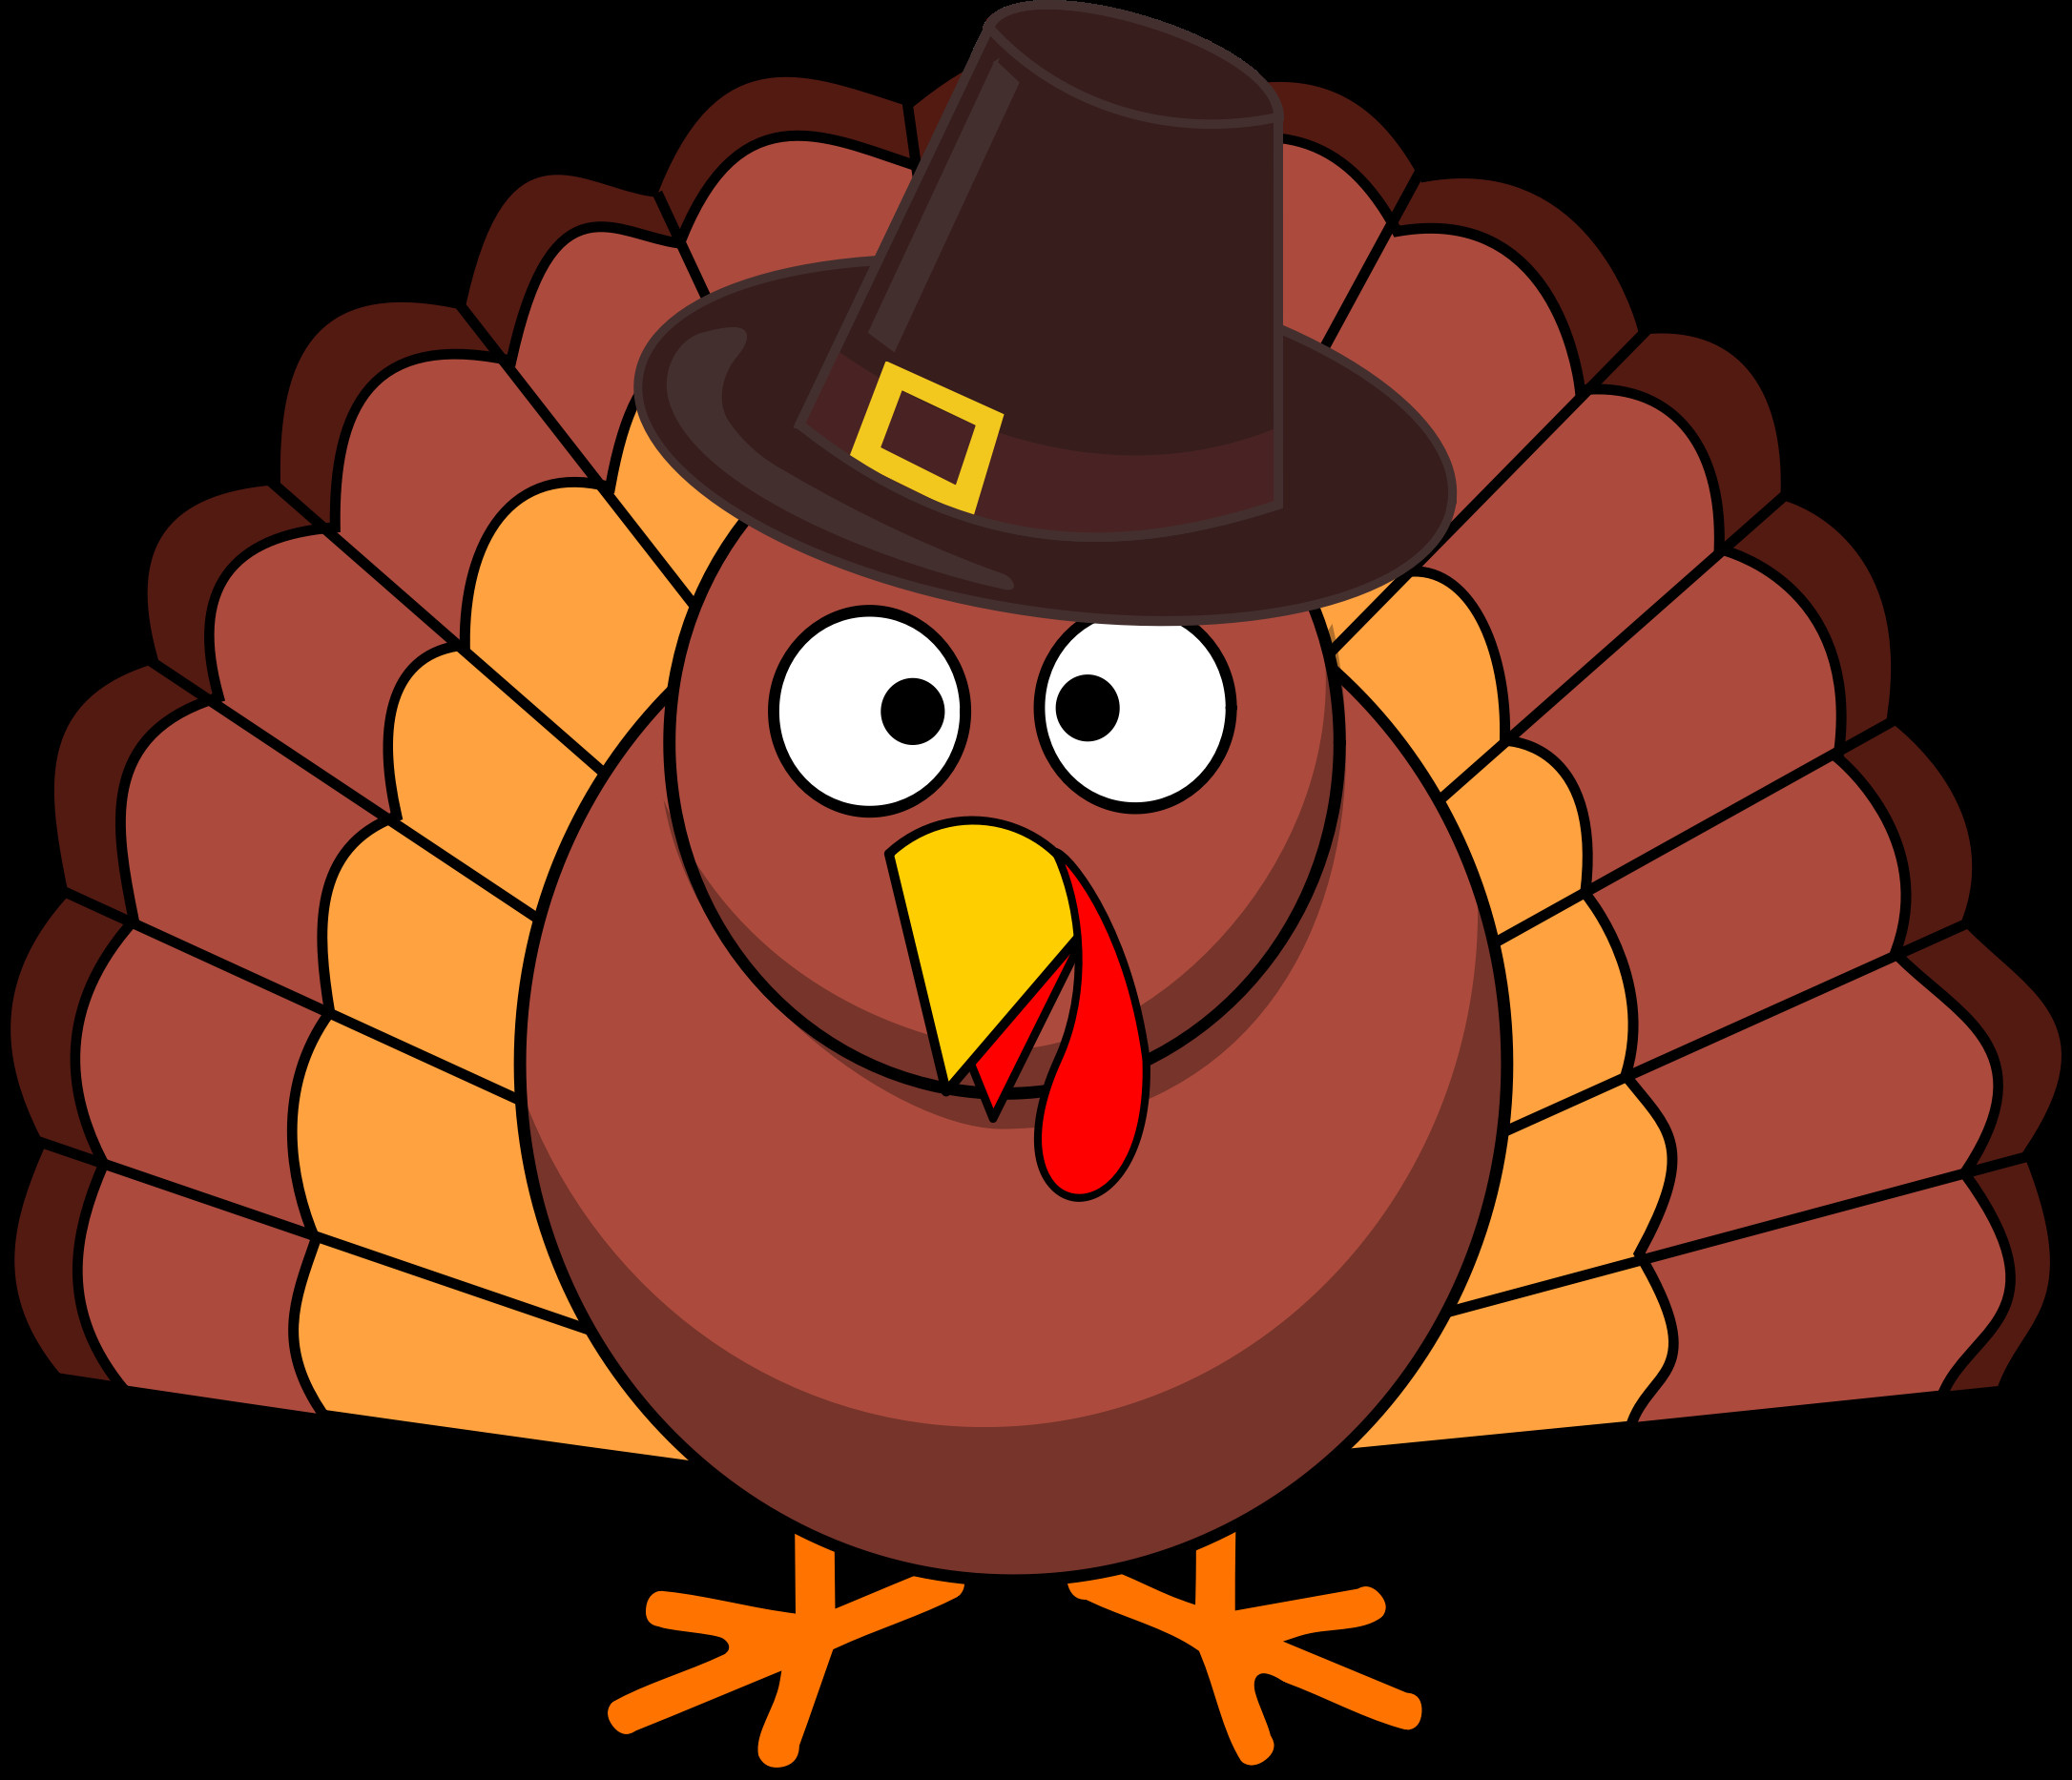 Thanksgiving Turkey Graphic
 Try timing your Thanksgiving turkey the Spotify way It’s